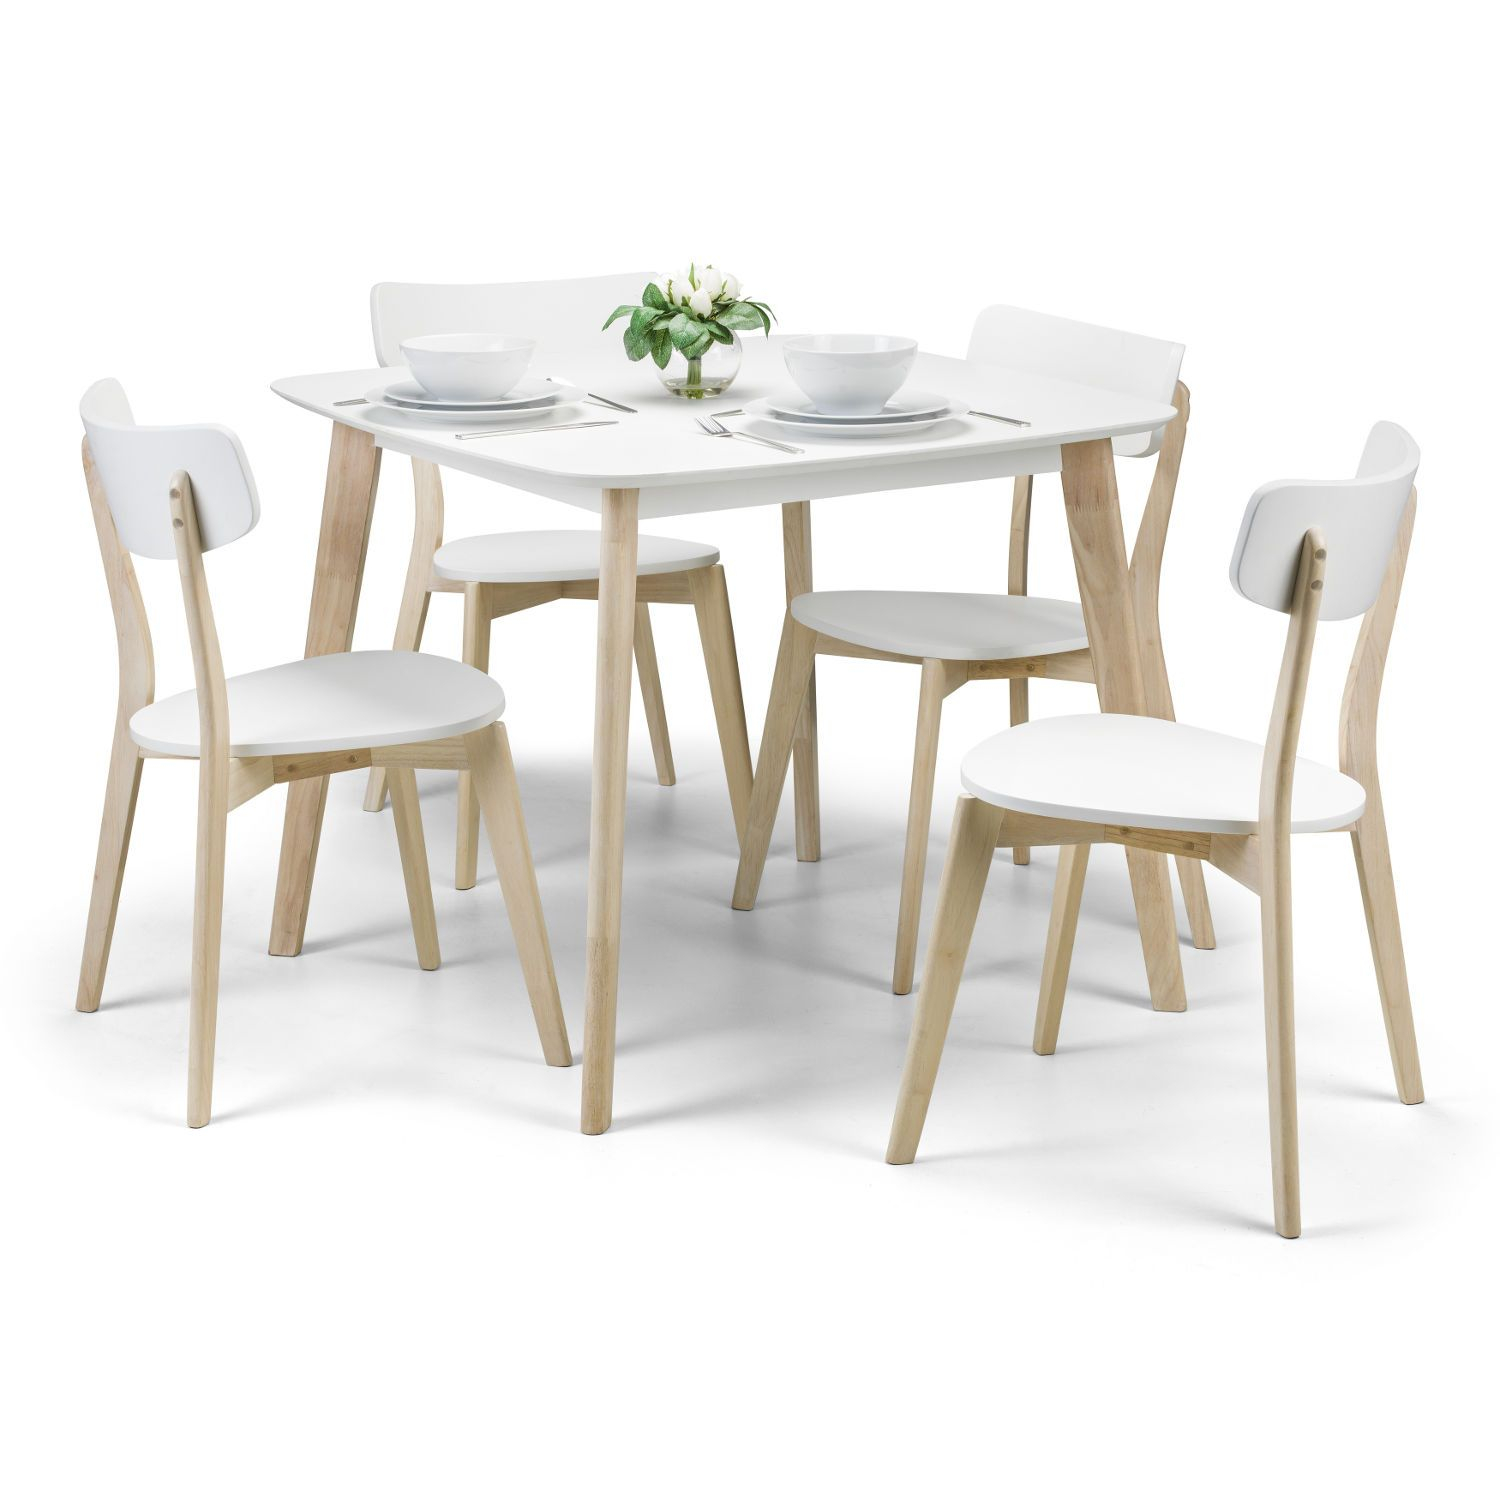 Casa Dining Table Next Day Delivery Casa Dining Table From with size 1500 X 1500